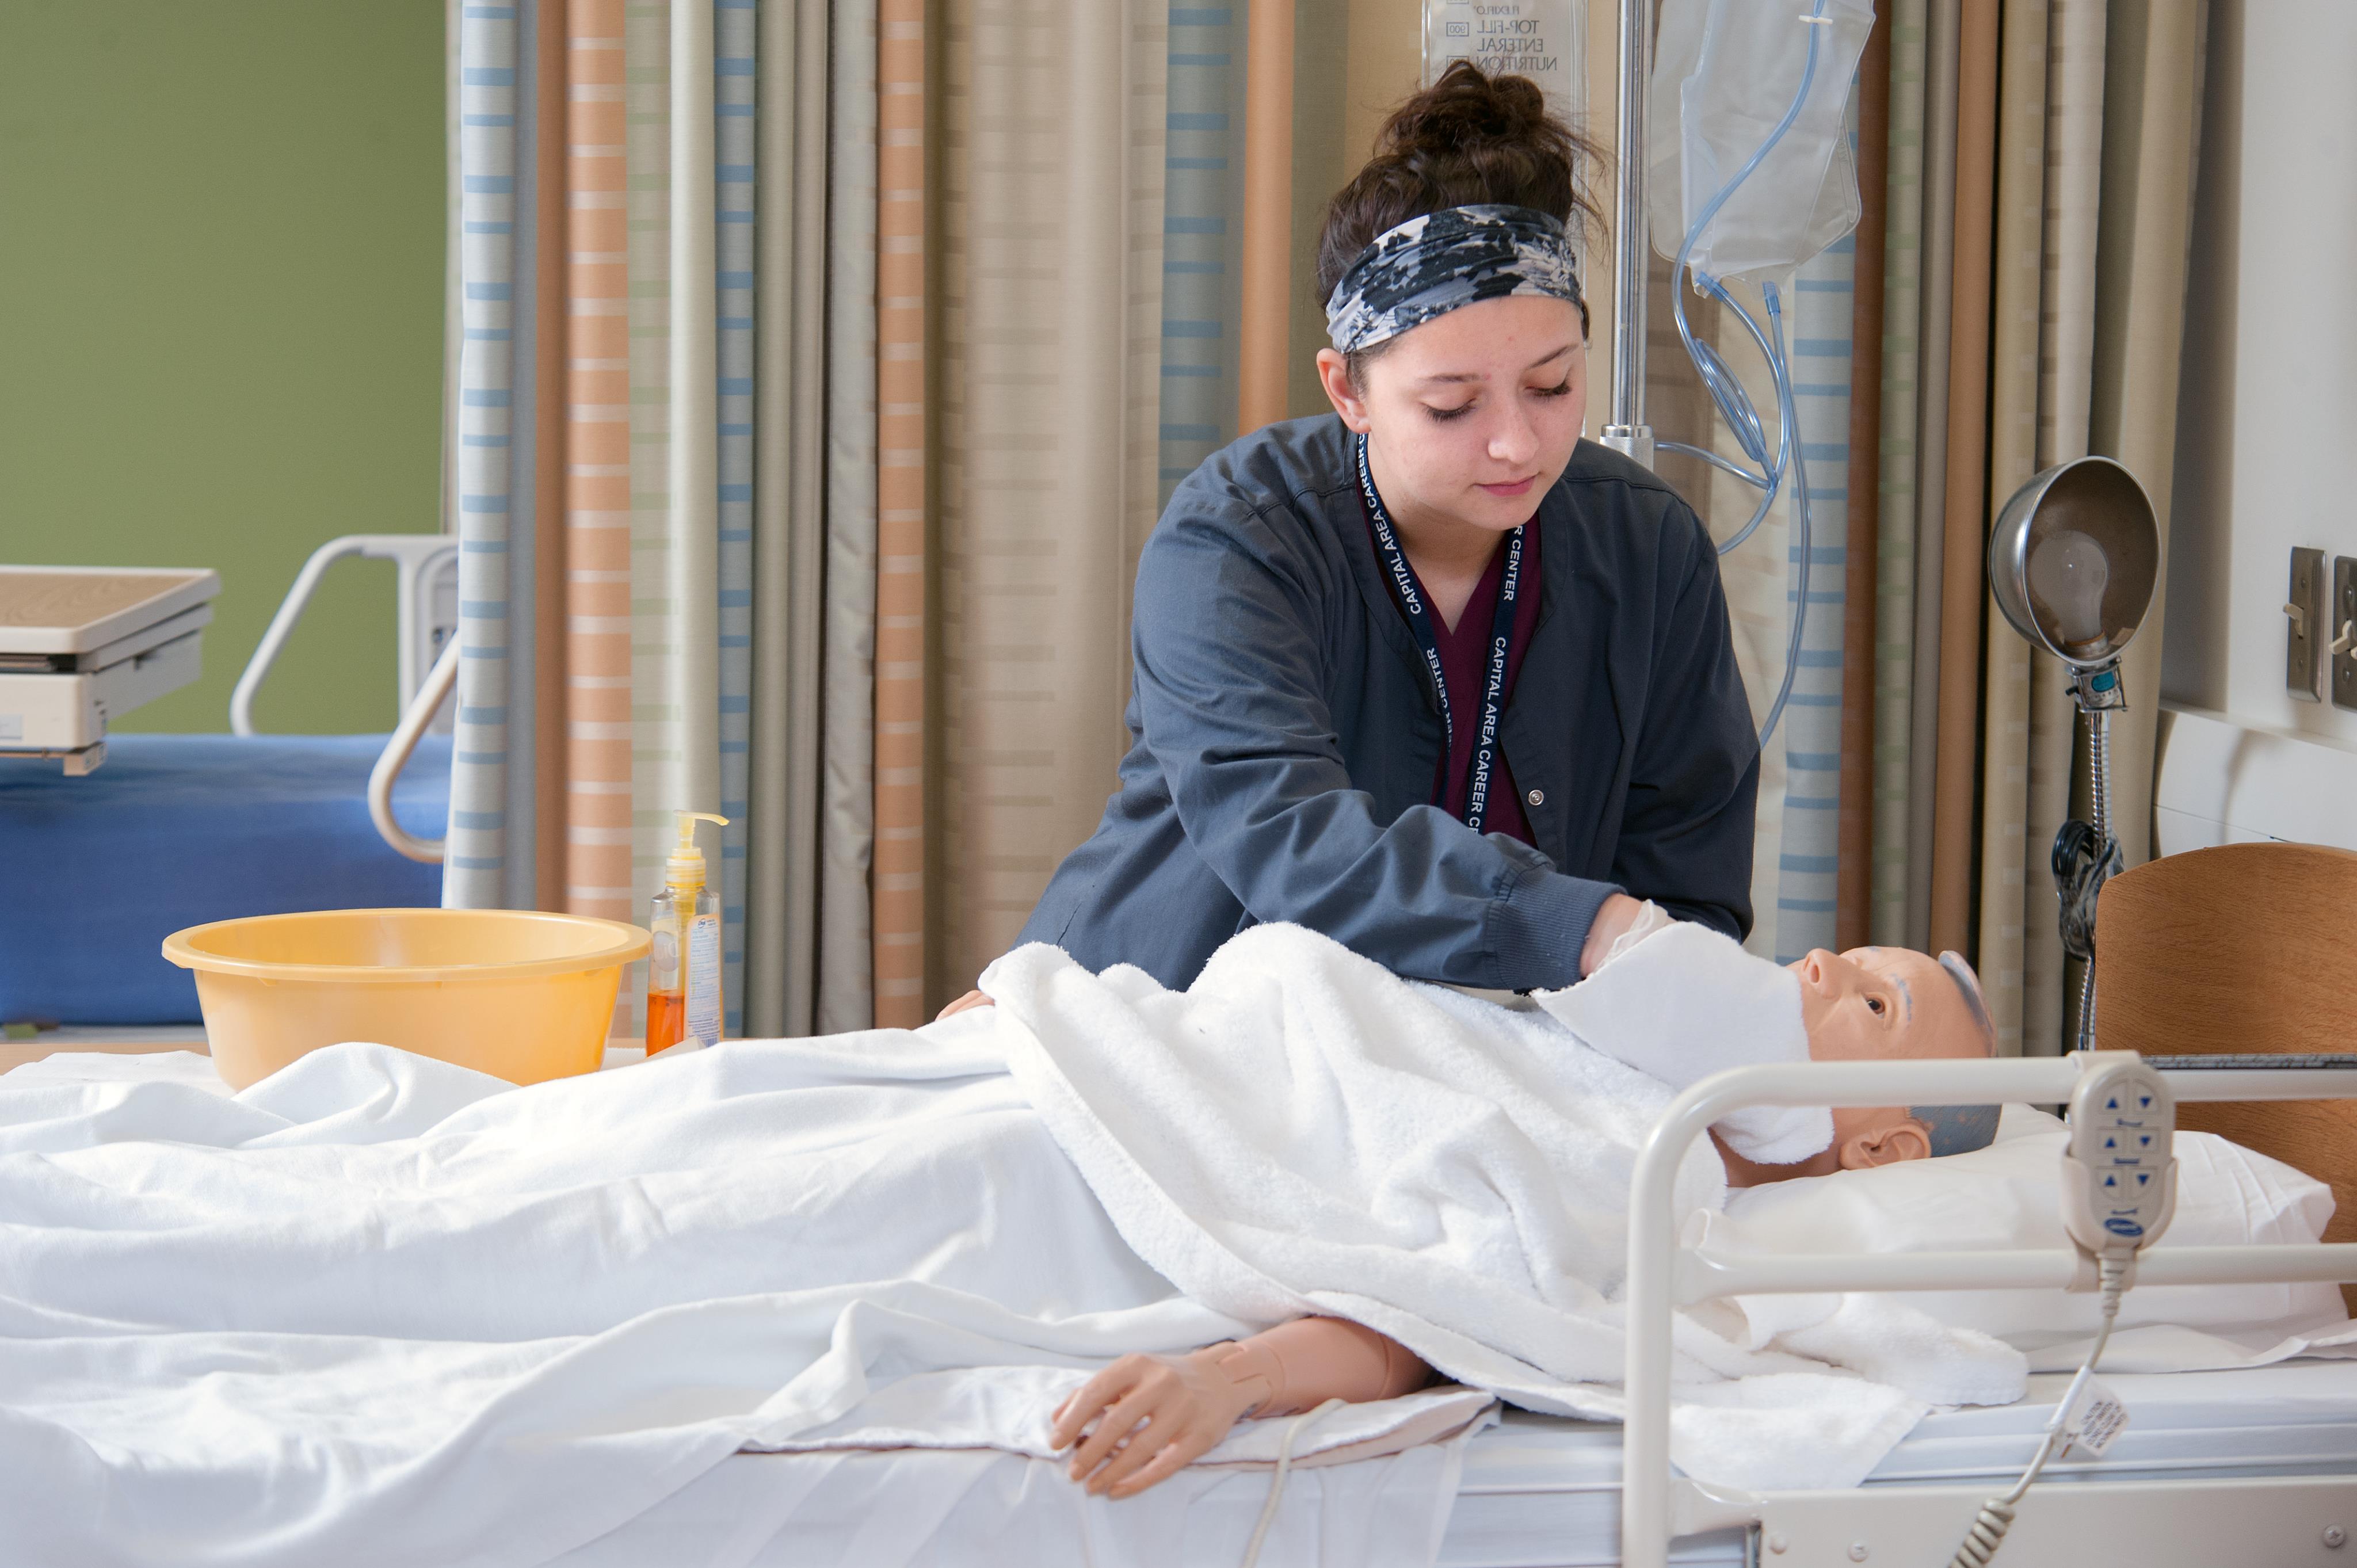 CNA student works on a patient in a hospital bed